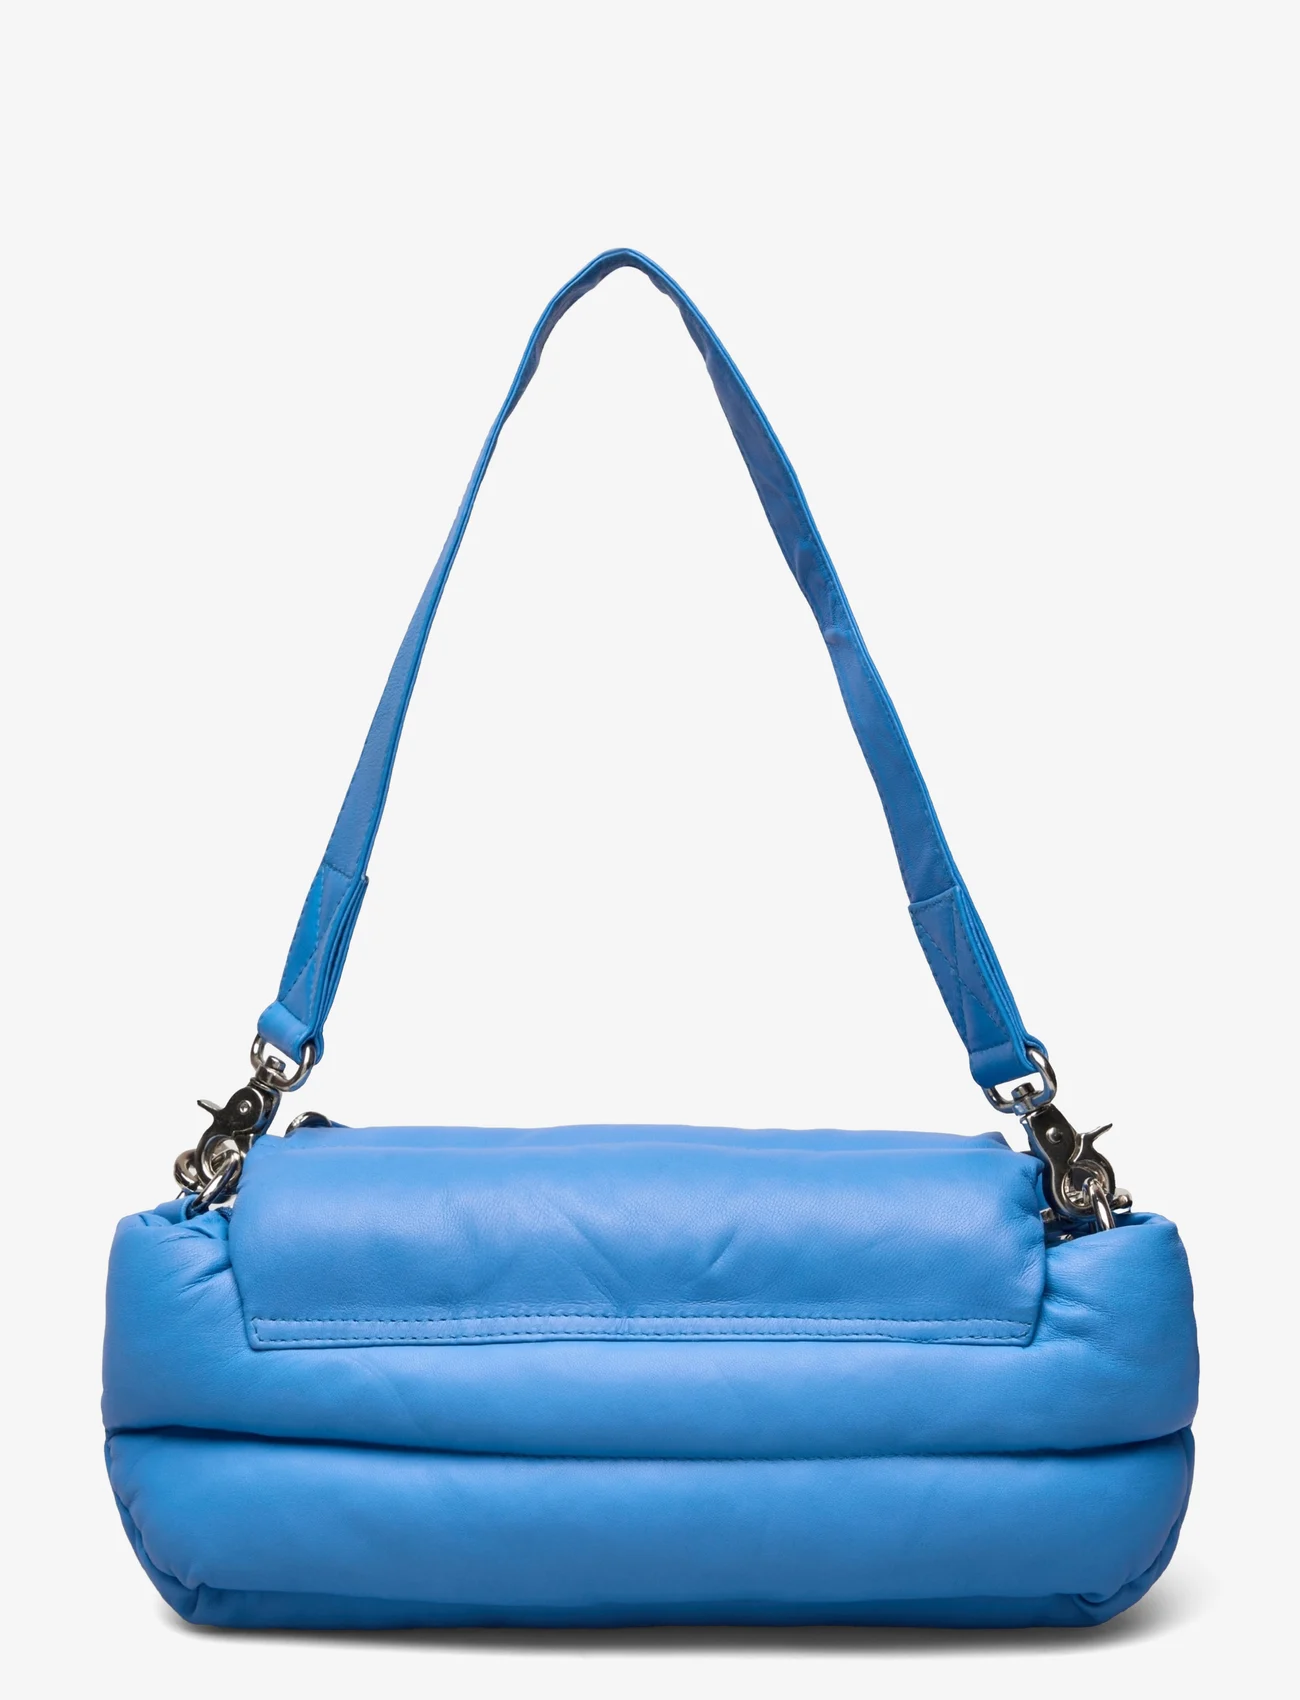 DEPECHE - Small bag / Clutch - 209 french blue - 1